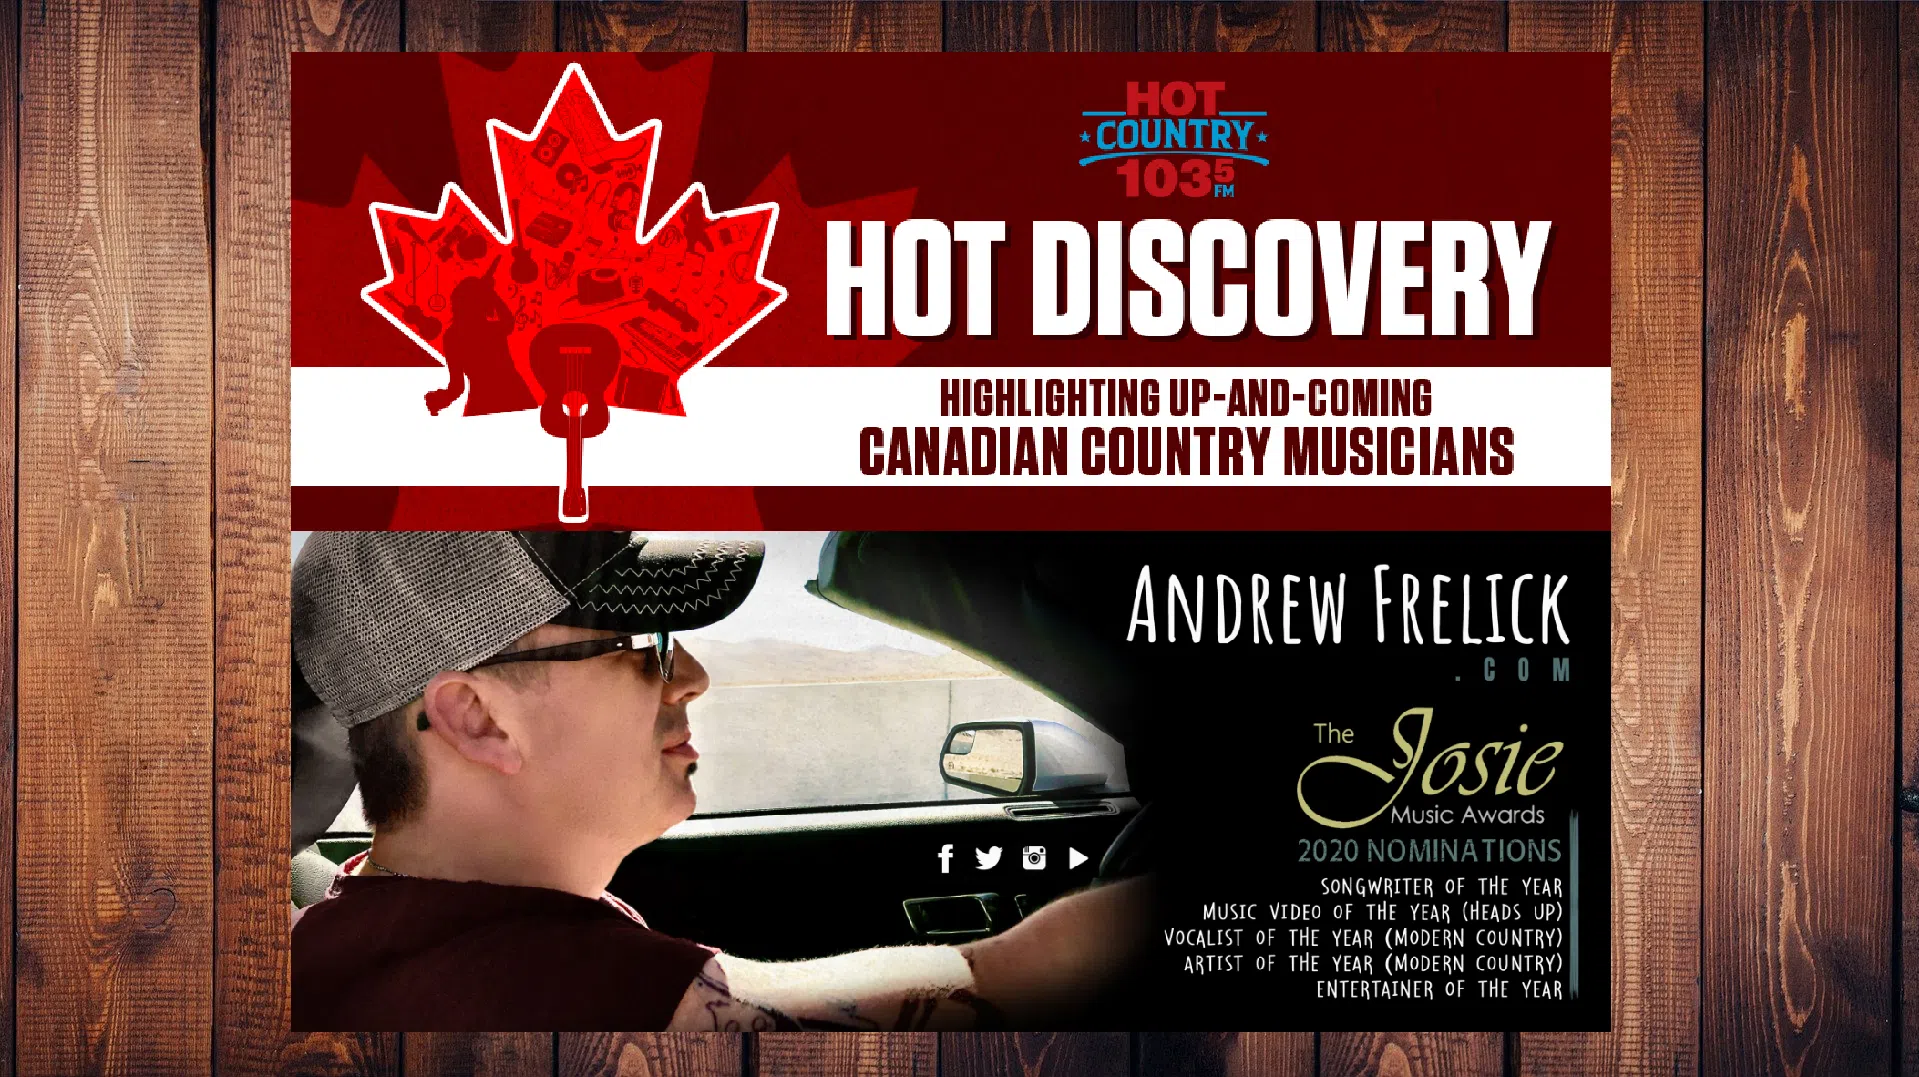 Andrew Frelick On This Week's Hot Discovery